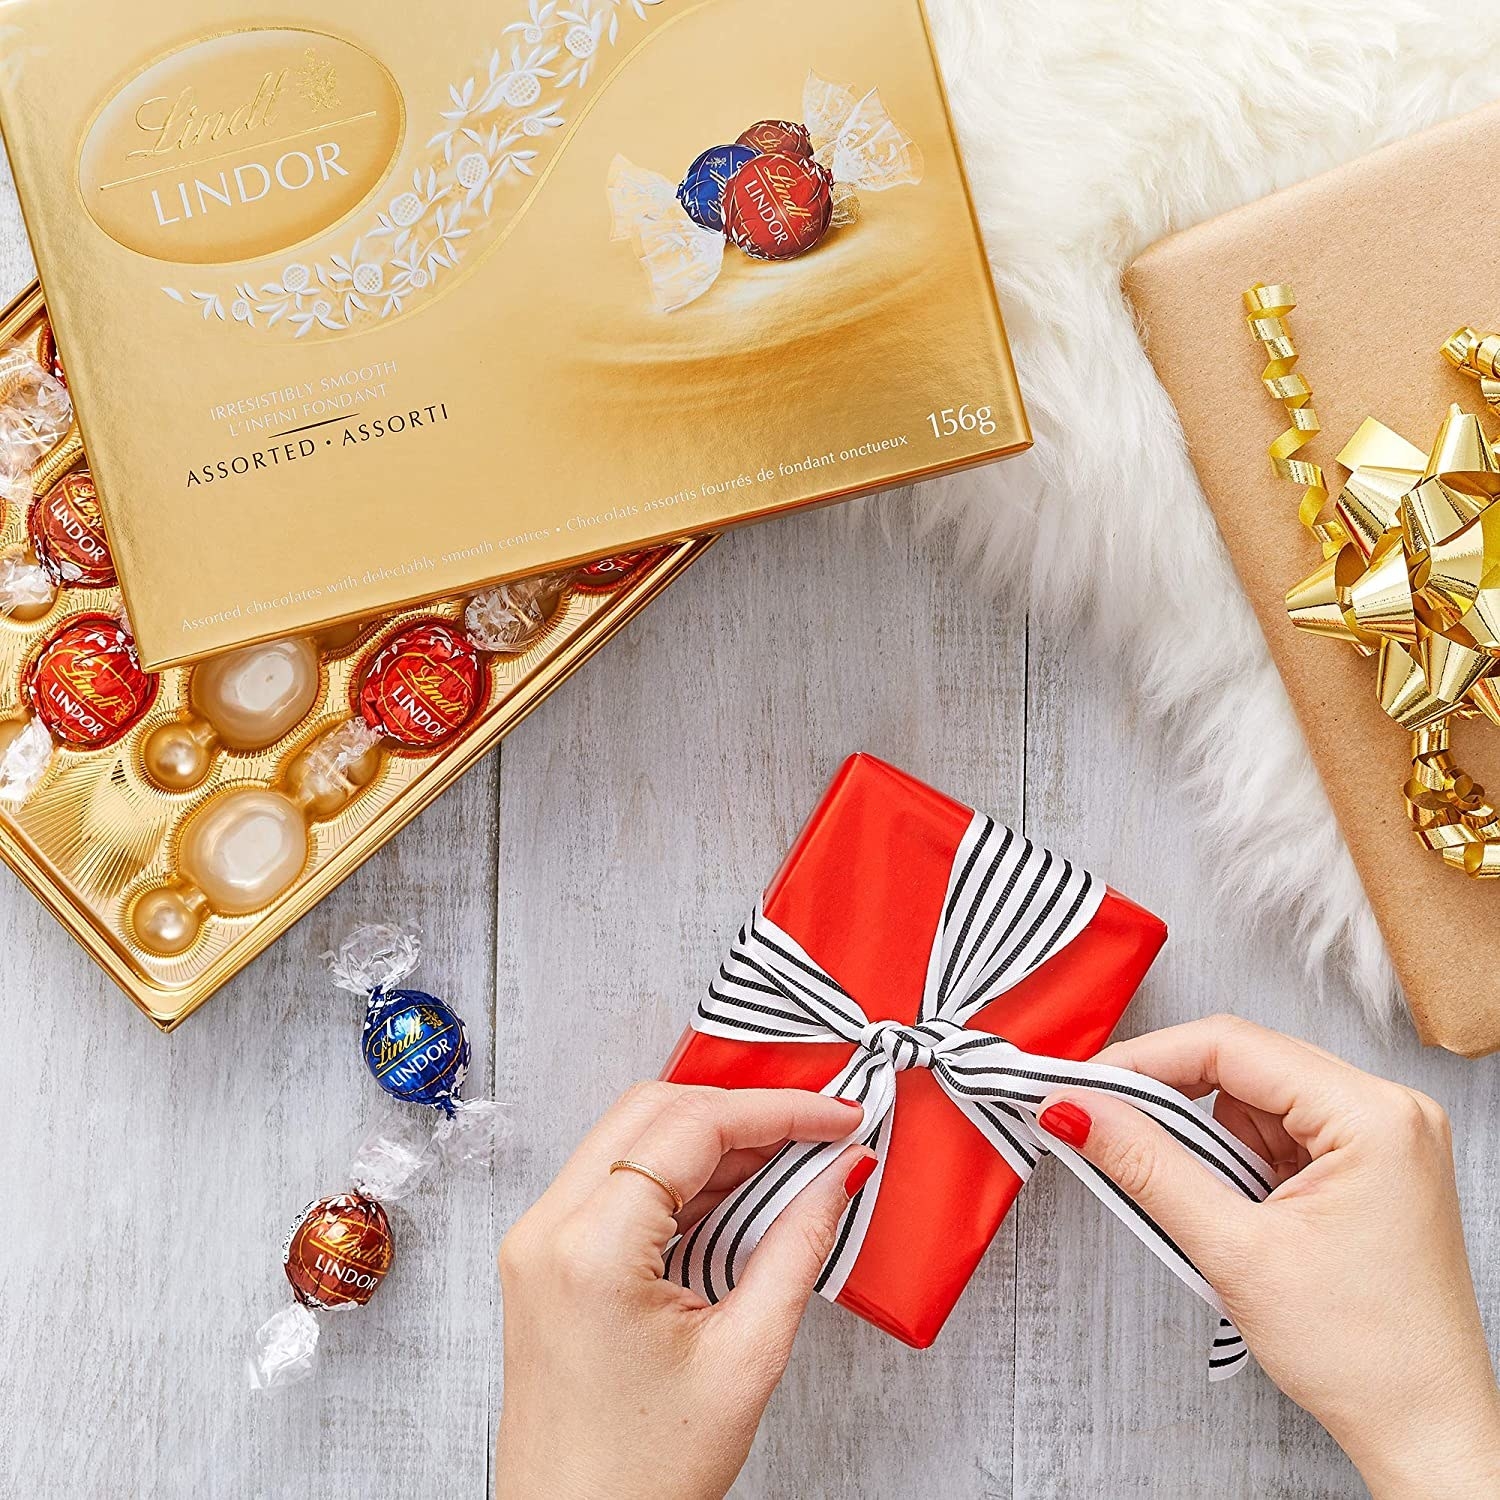 Hands tie a ribbon around a box of chocolates